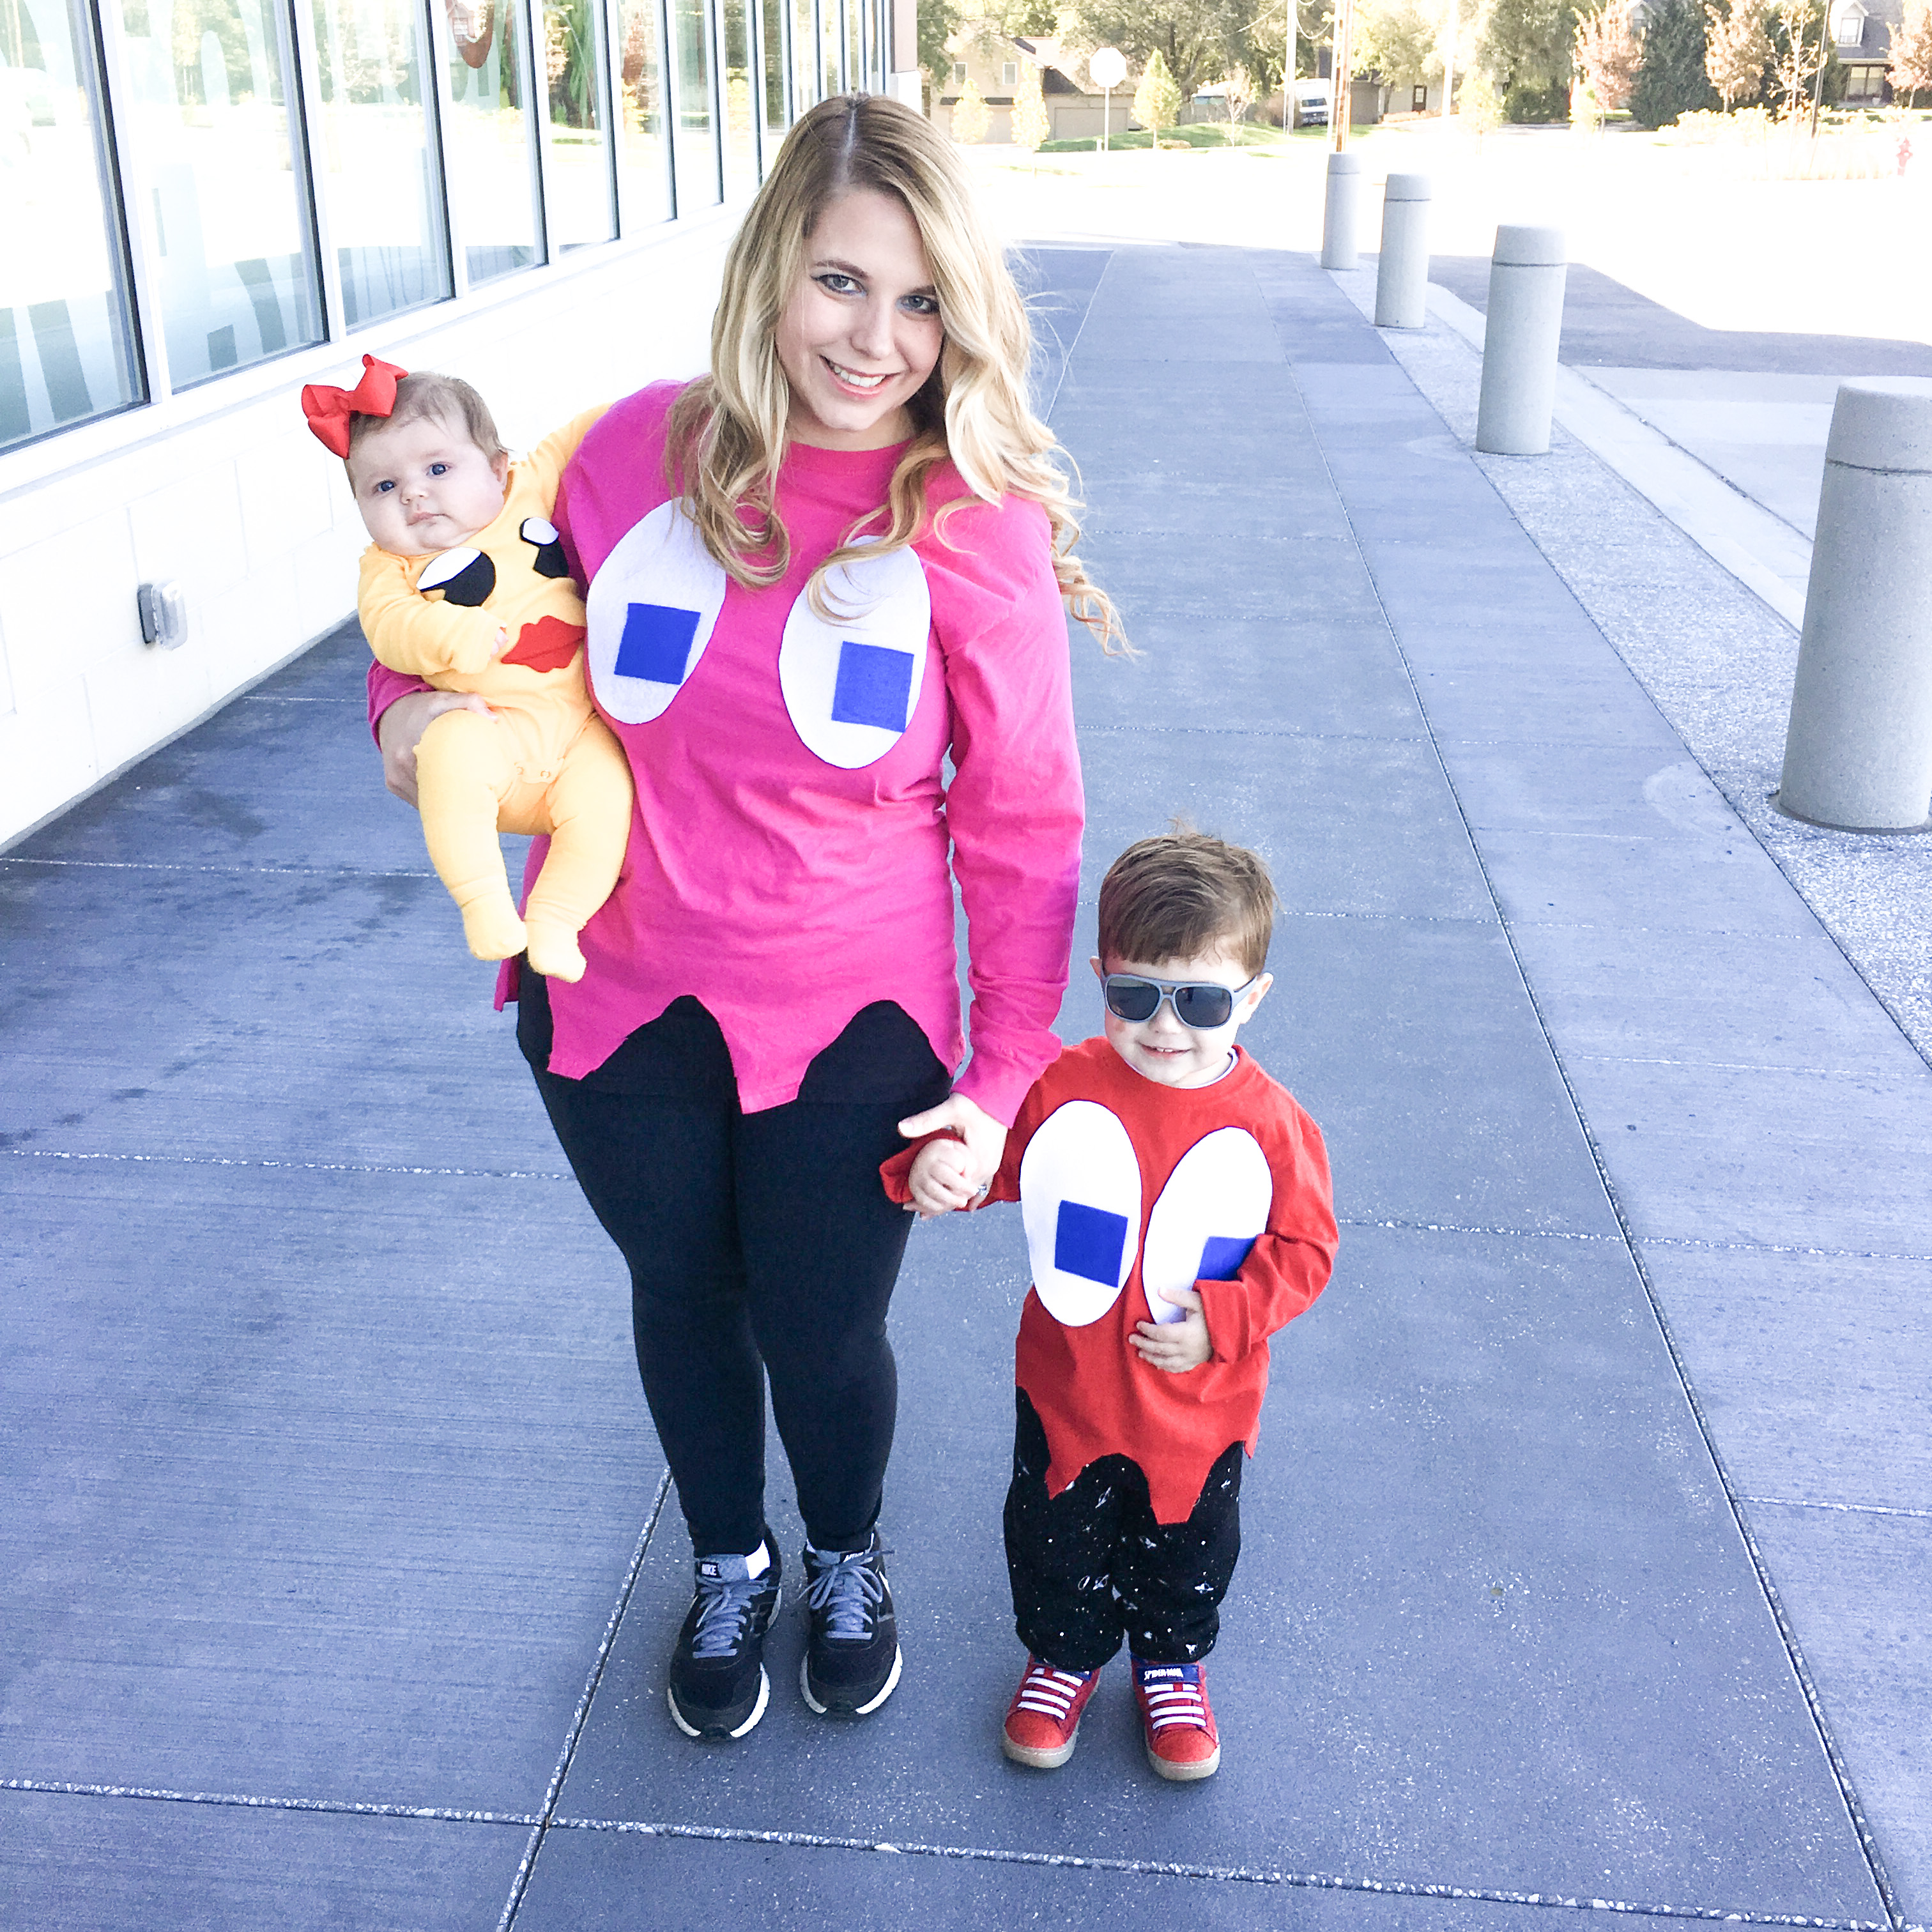 Ms. Pac-Man and Ghosts Costumes [DIY Family Halloween] • COVET by tricia